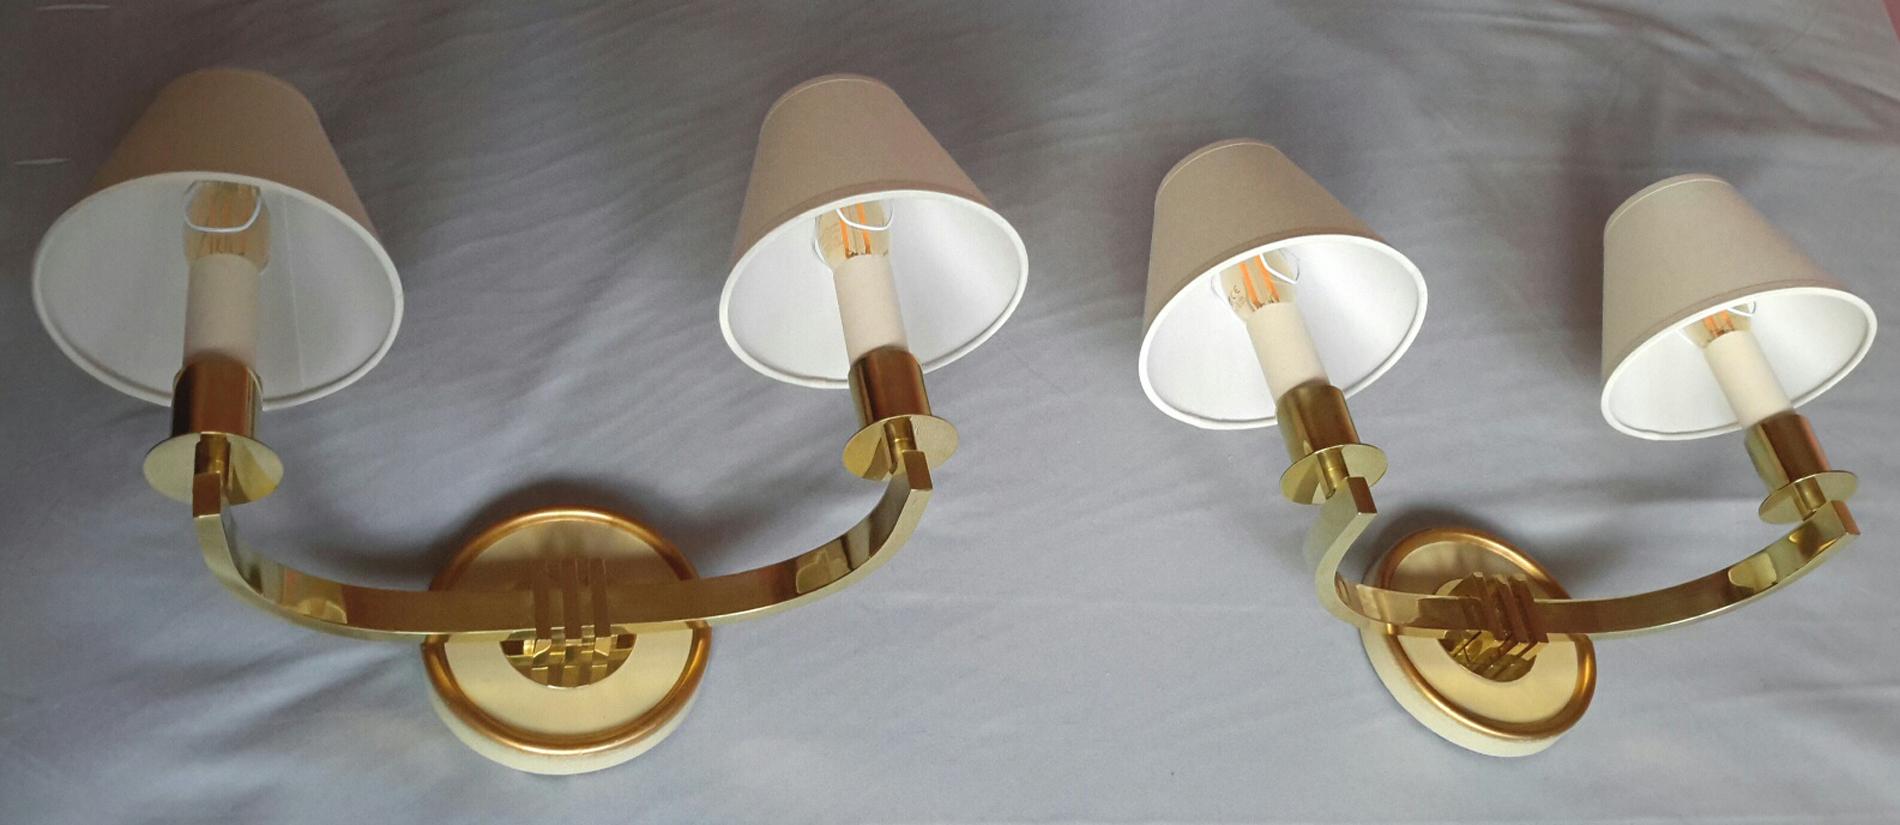 Gilt Pair of French Mid-Century Modern Wall Sconces, 1950